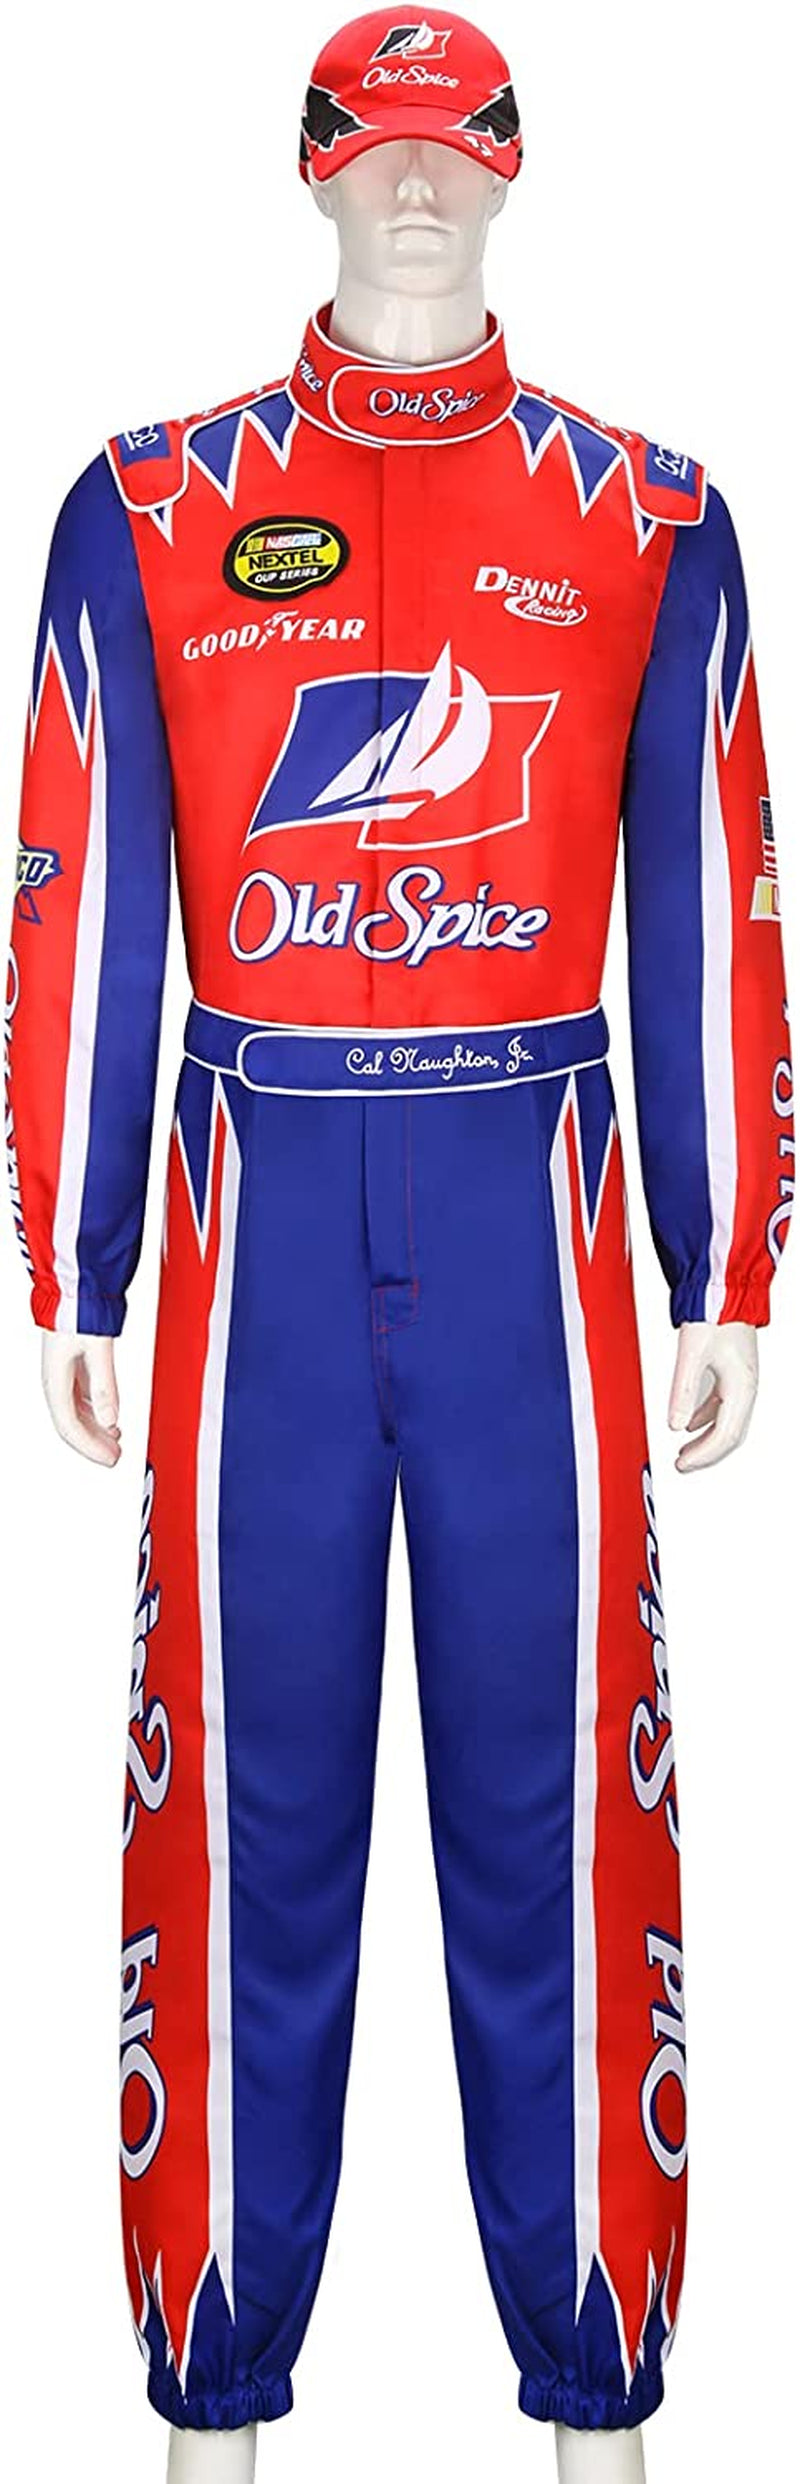 Adult Mens Ricky Bobby Costume Racing Jumpsuit Cap Full Set Talladega Nights Cosplay Outfit Uniform Halloween Carnival Suit  NIHONCOS Red 3X-Large 